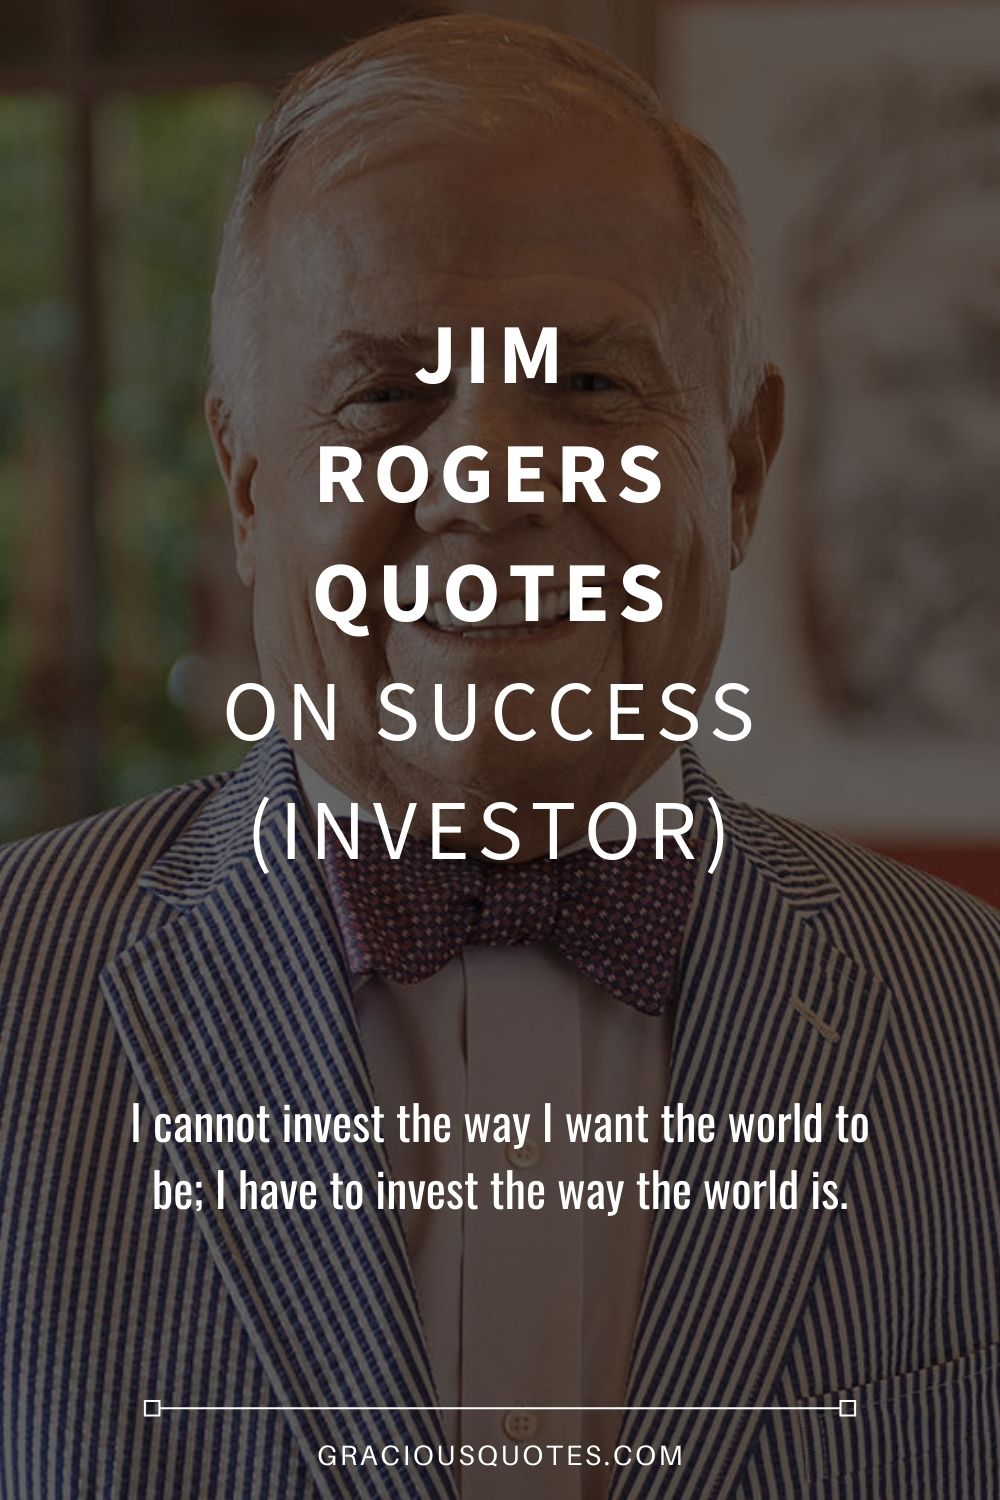 Jim Rogers Quotes on Success (INVESTOR) - Gracious Quotes